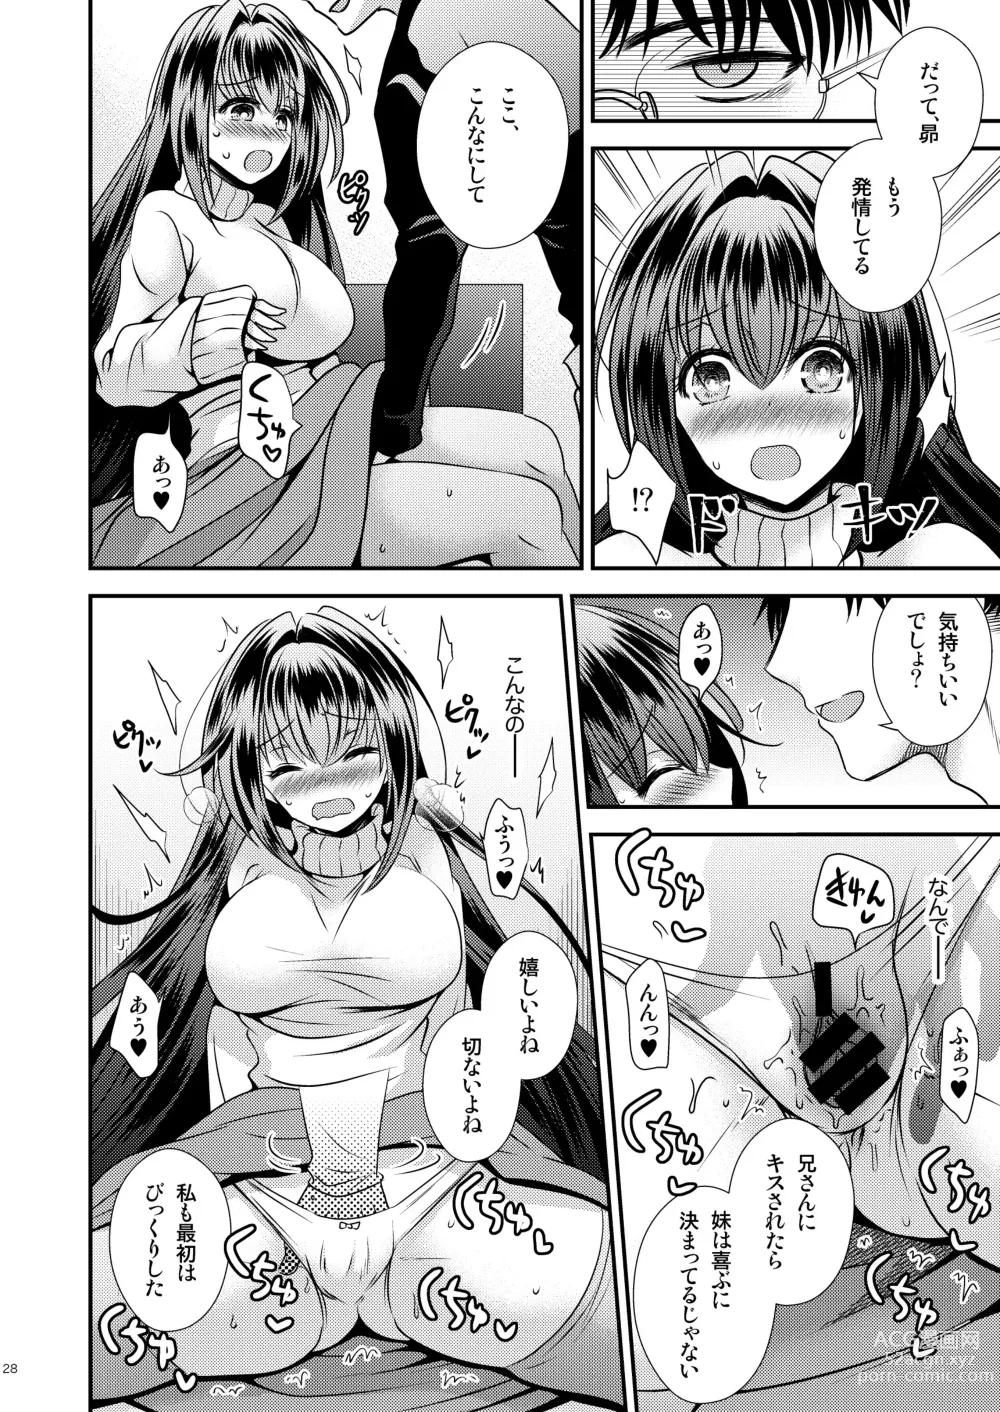 Page 28 of doujinshi 性欲処理に使っていた妹と入れ替わった兄